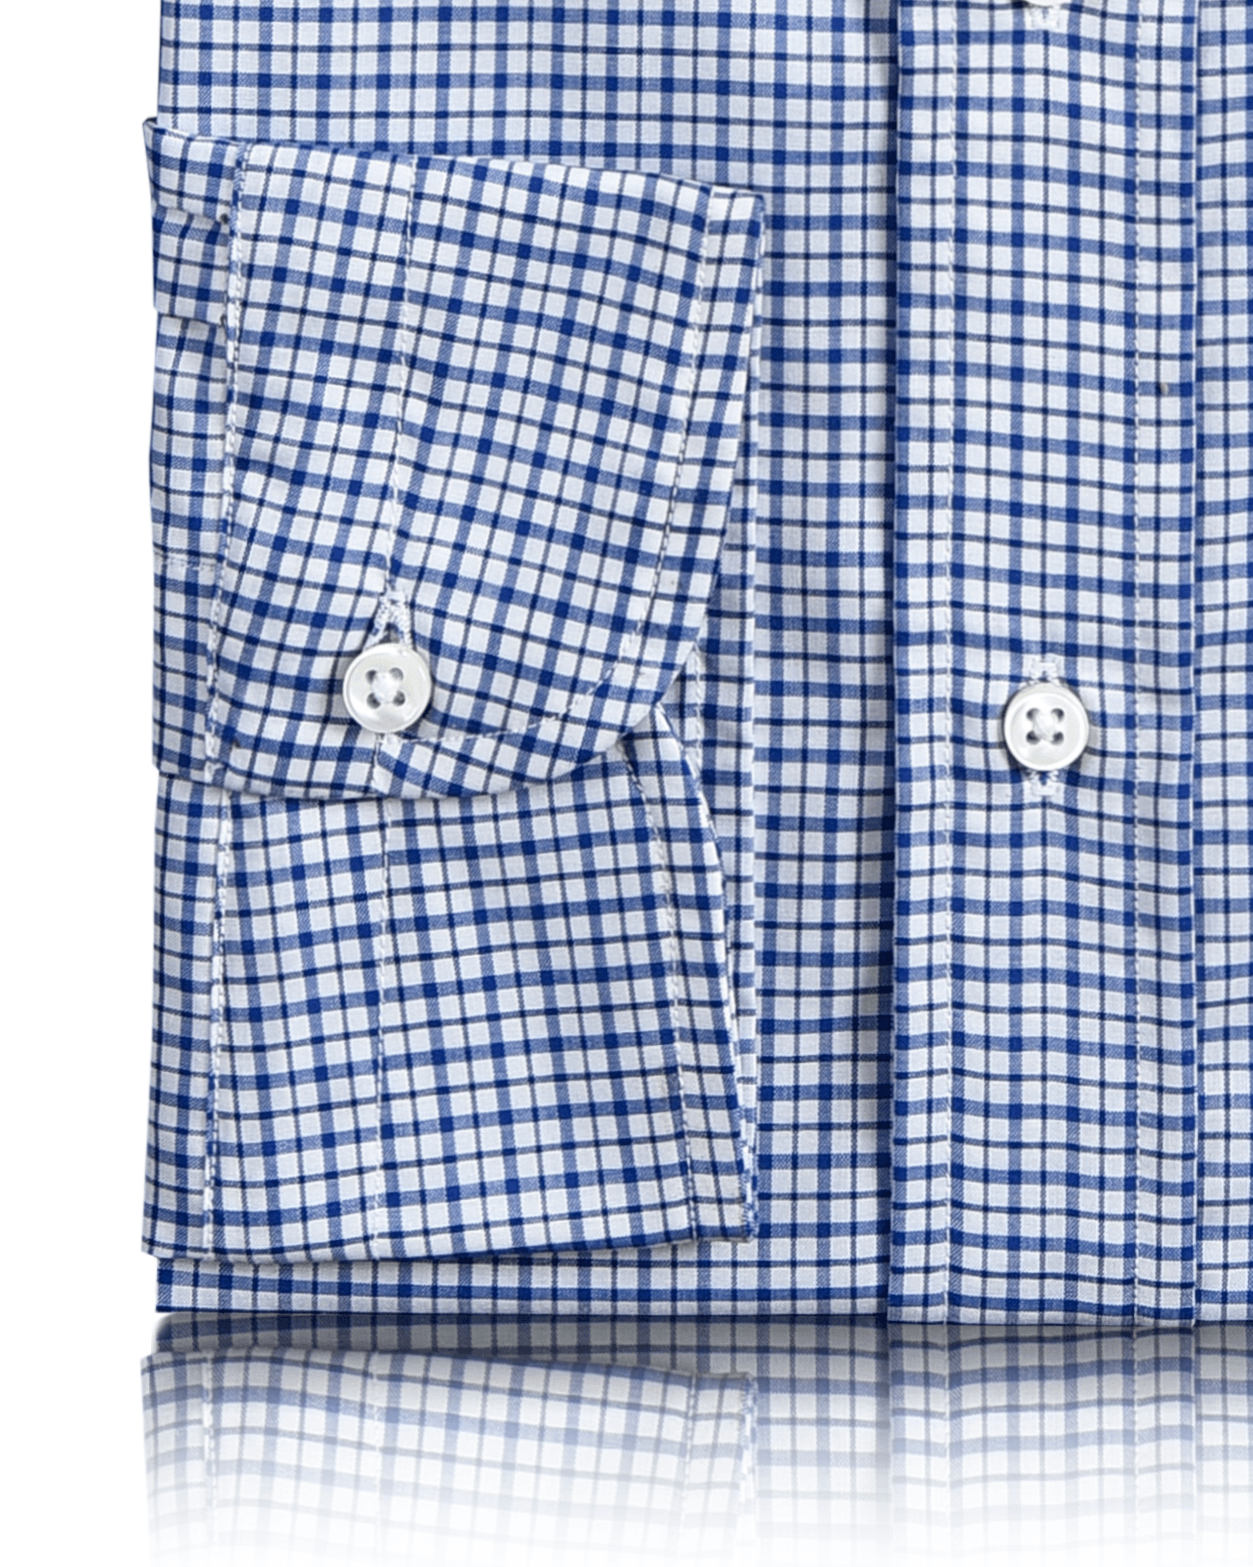 Close up view of custom check shirts for men by Luxire navy checks on white